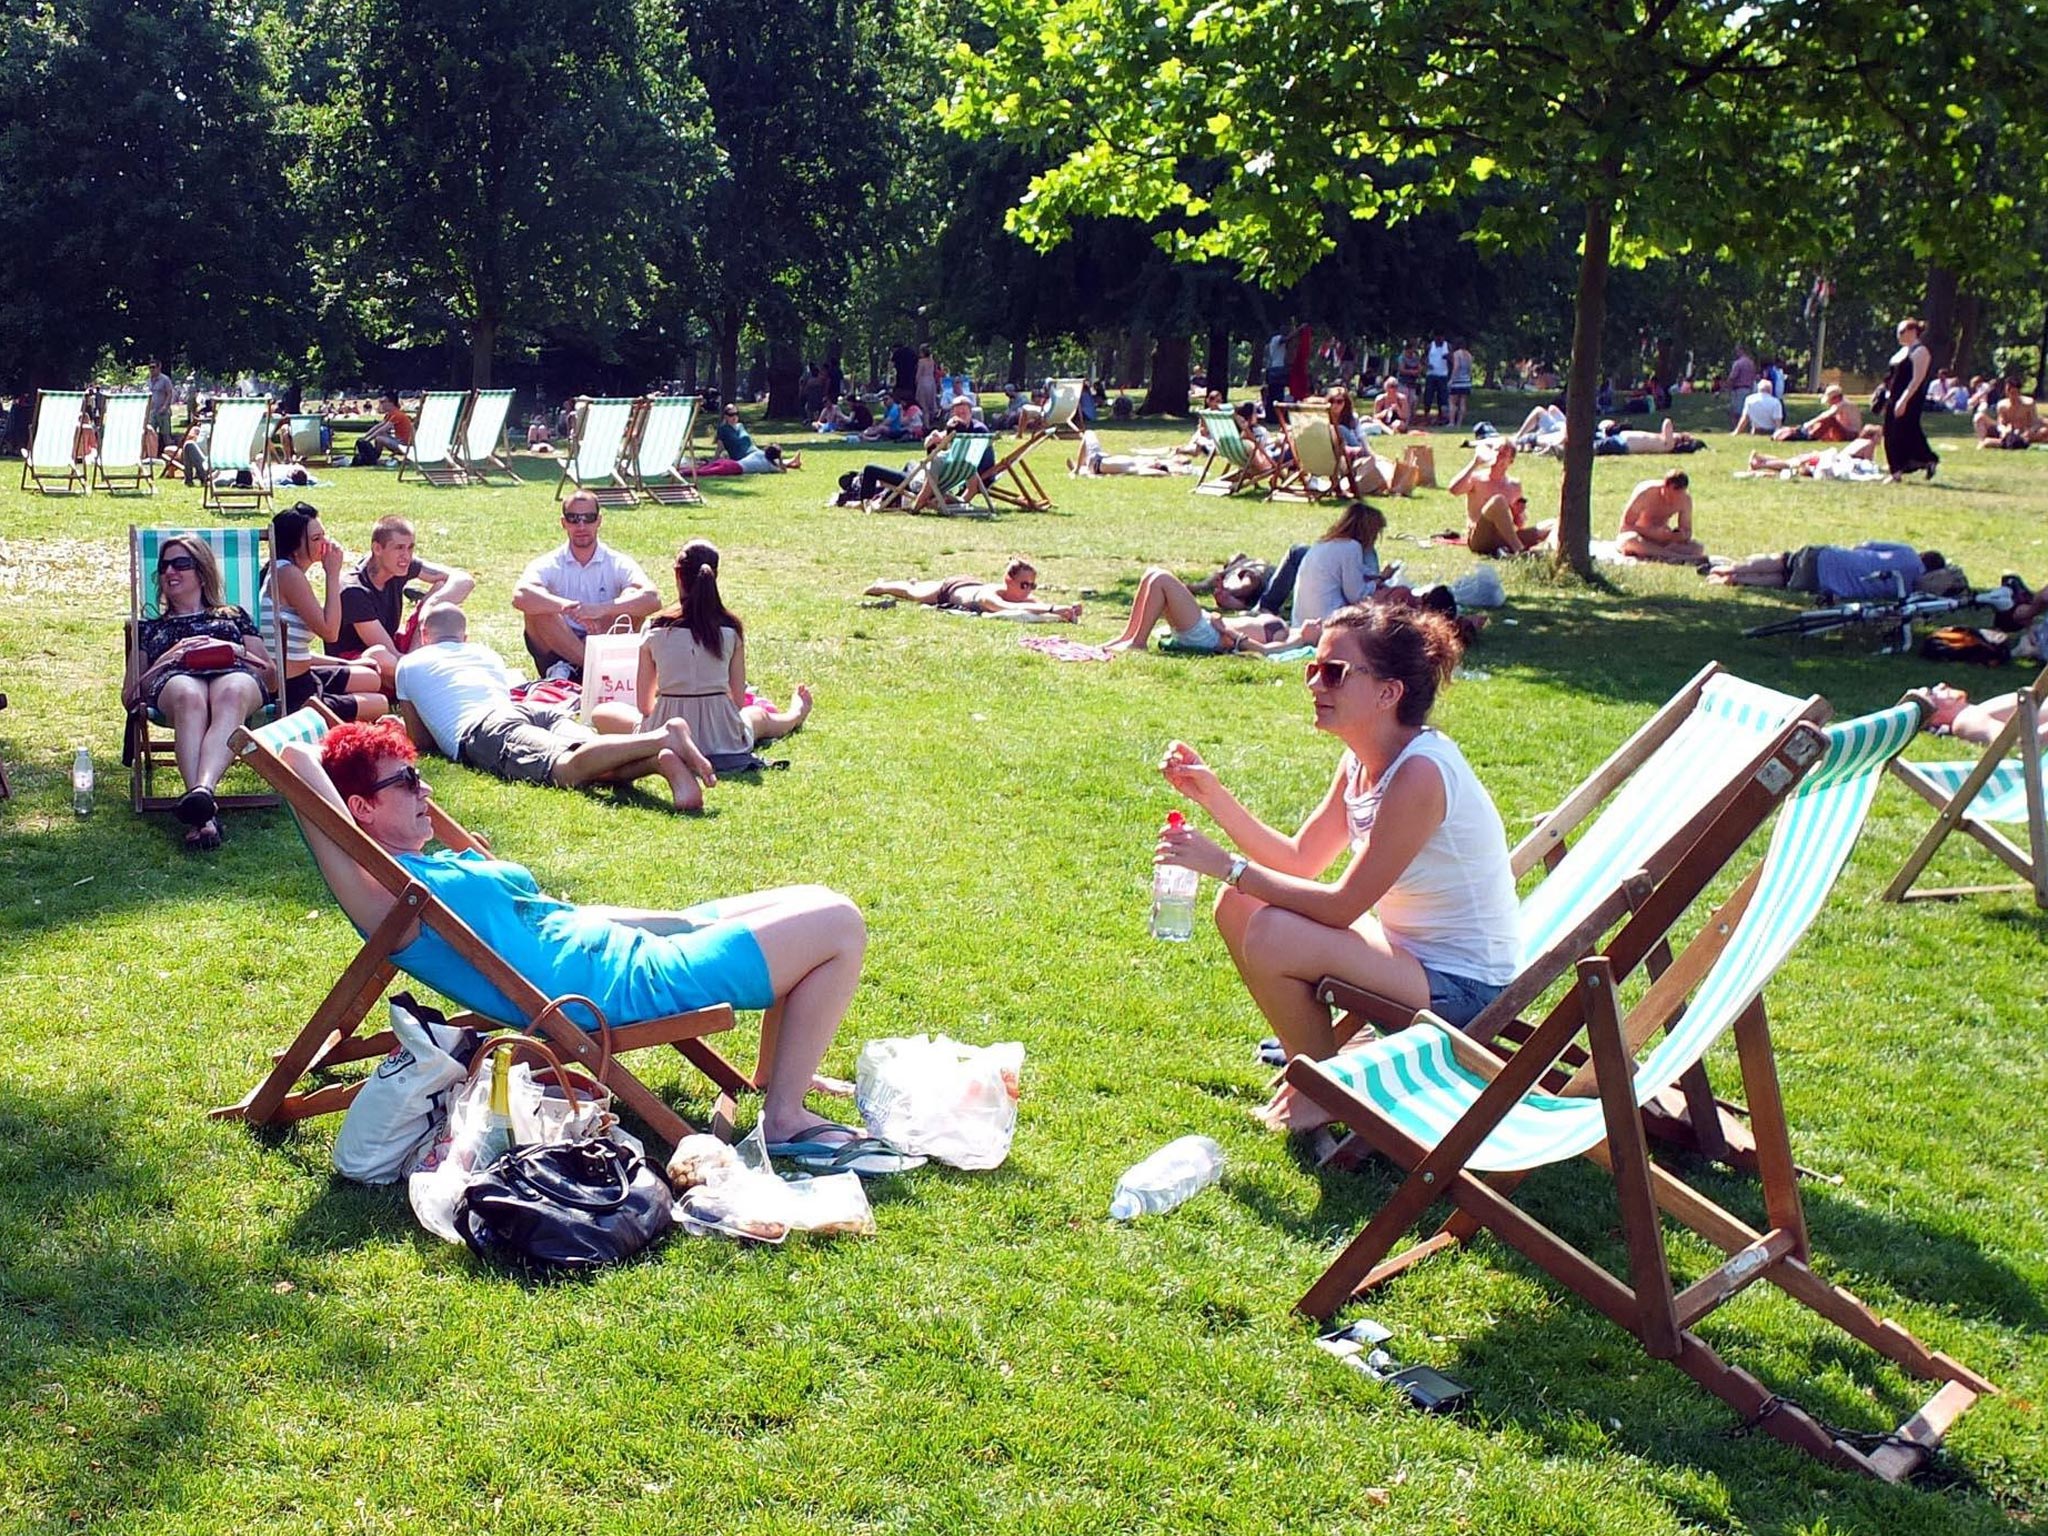 Sunbathers in St James Park, London, as much of Britain is bathed in sunshine